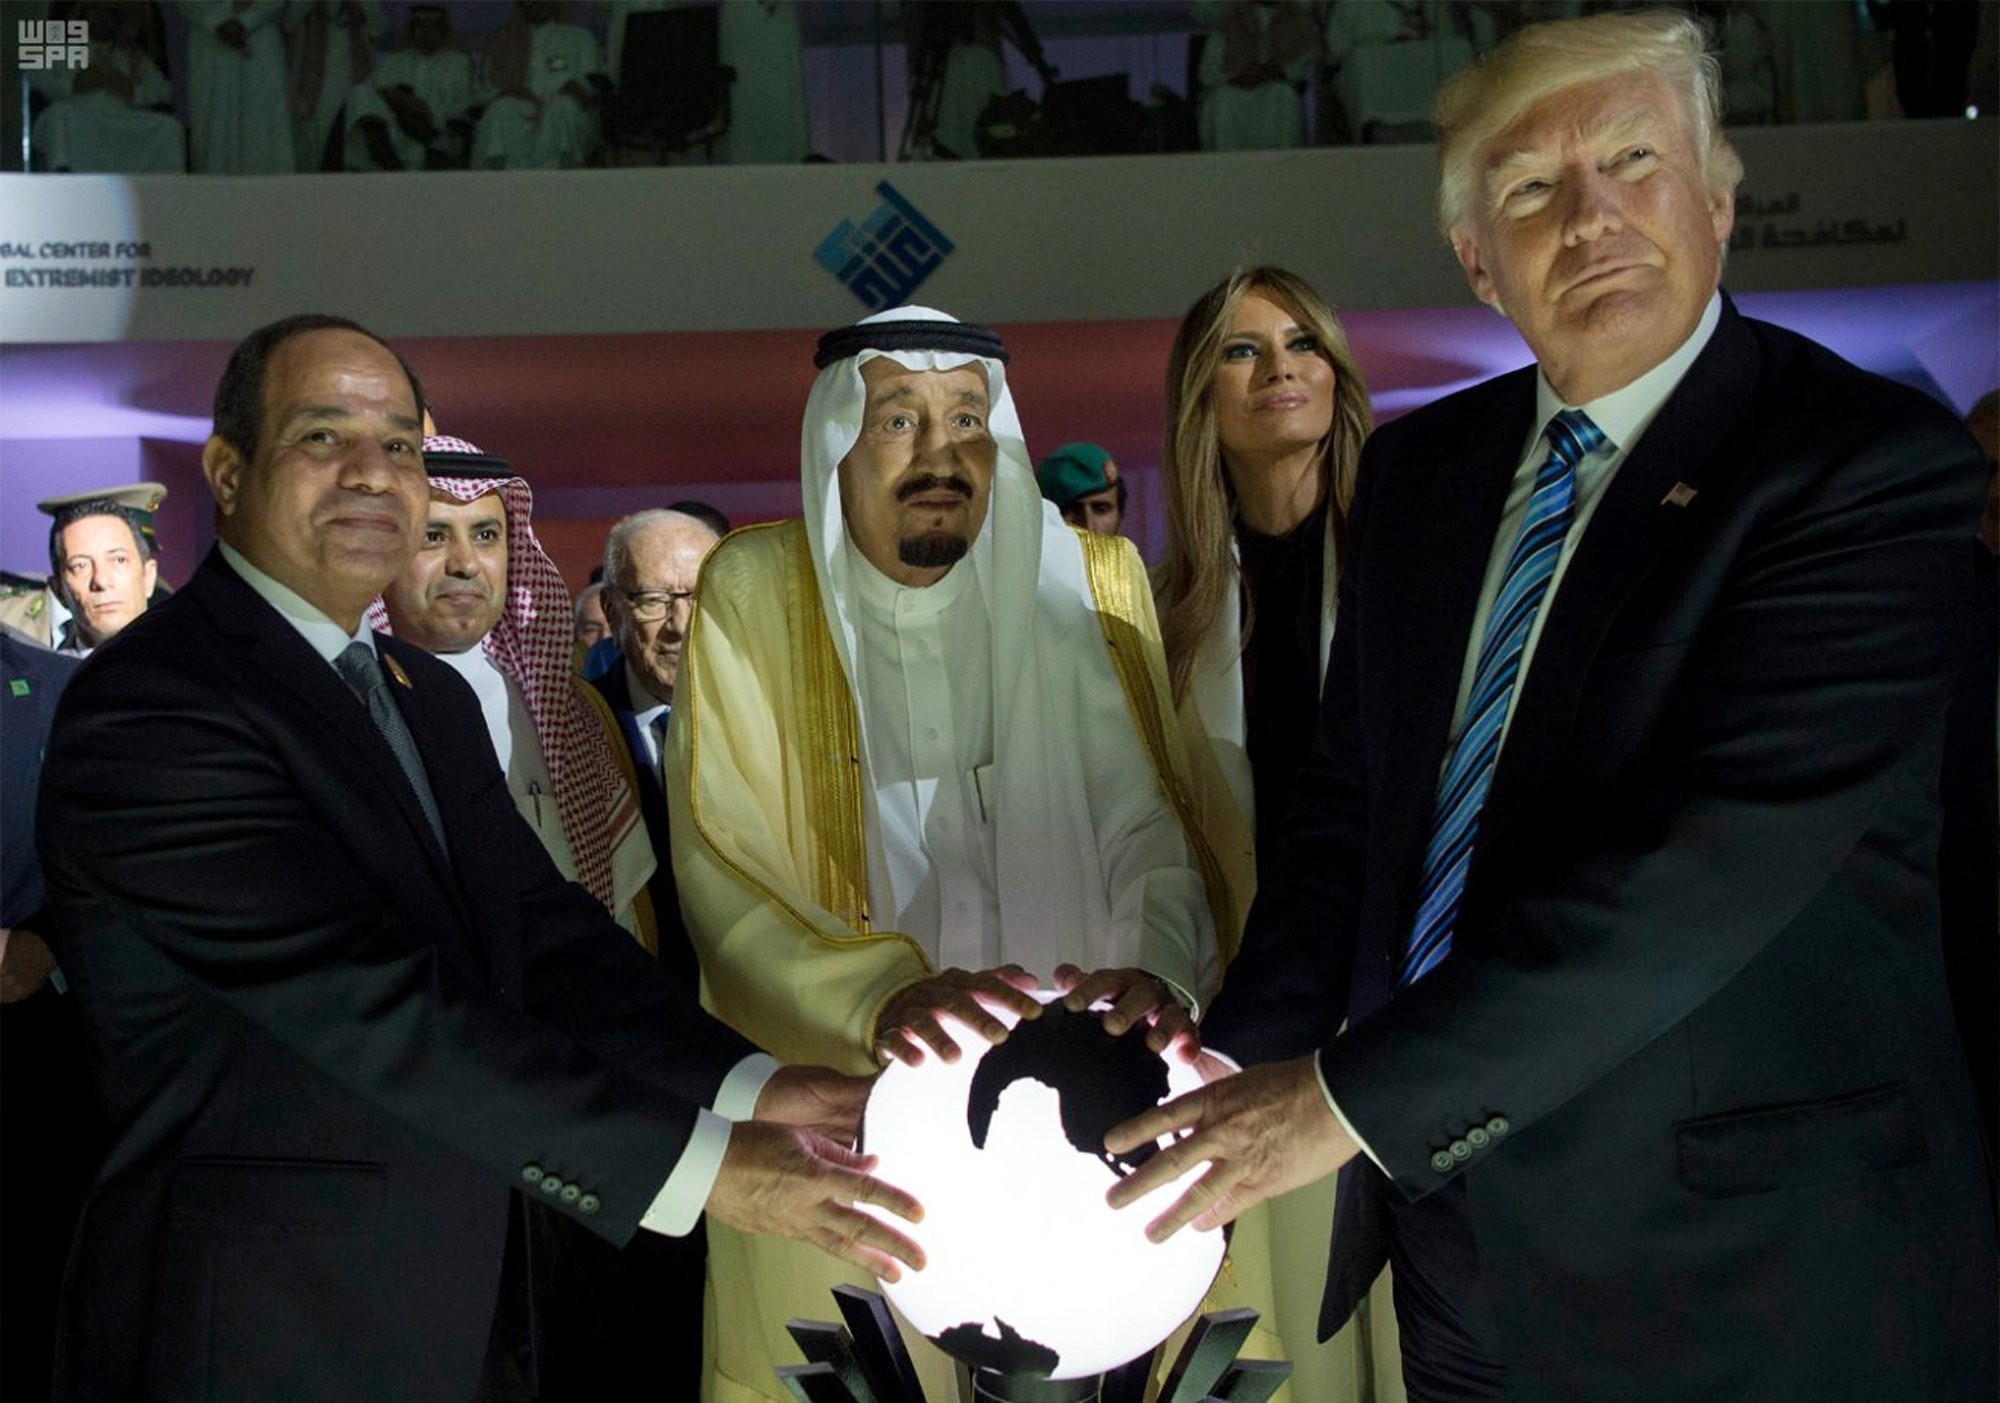 From left to right, Egyptian President Abdel-Fattah el-Sissi, Saudi King Salman, then U.S. First Lady Melania Trump and then U.S. President Donald Trump put their hands on an illuminated globe during the inauguration ceremony of the Global Center for Combating Extremist Ideology, Riyadh, Saudi Arabia, May 21, 2017. (AP Photo)